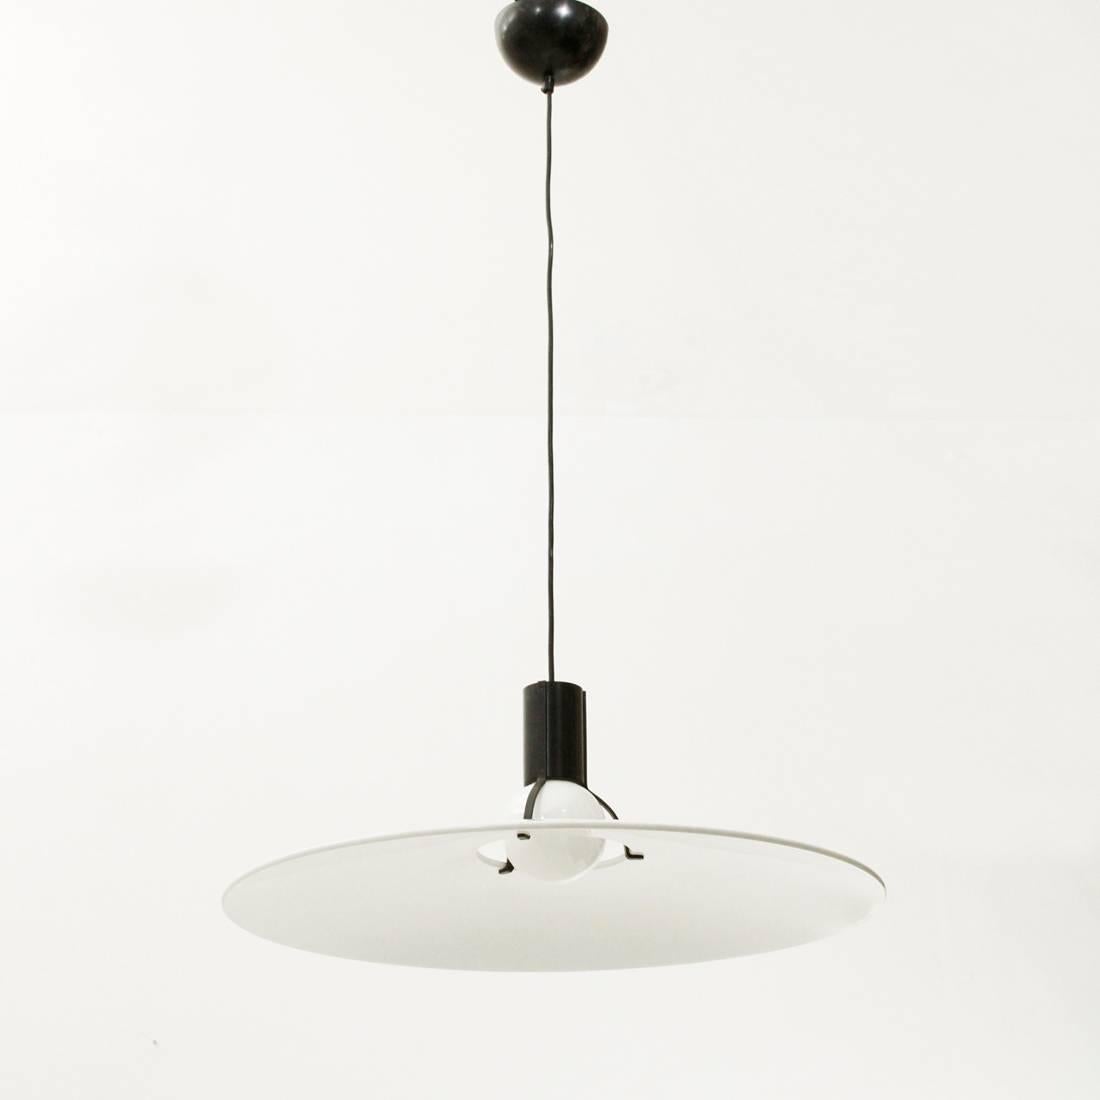 Ceiling lamp designed in 1973 by Gino Sarfatti for Arteluce.
Black metal structure, circular diffuser in white lacquered metal.
Dents on the diffuser.
Dimensions: Diameter 61 cm, diffuser height 20 cm, total height 150 cm.
 